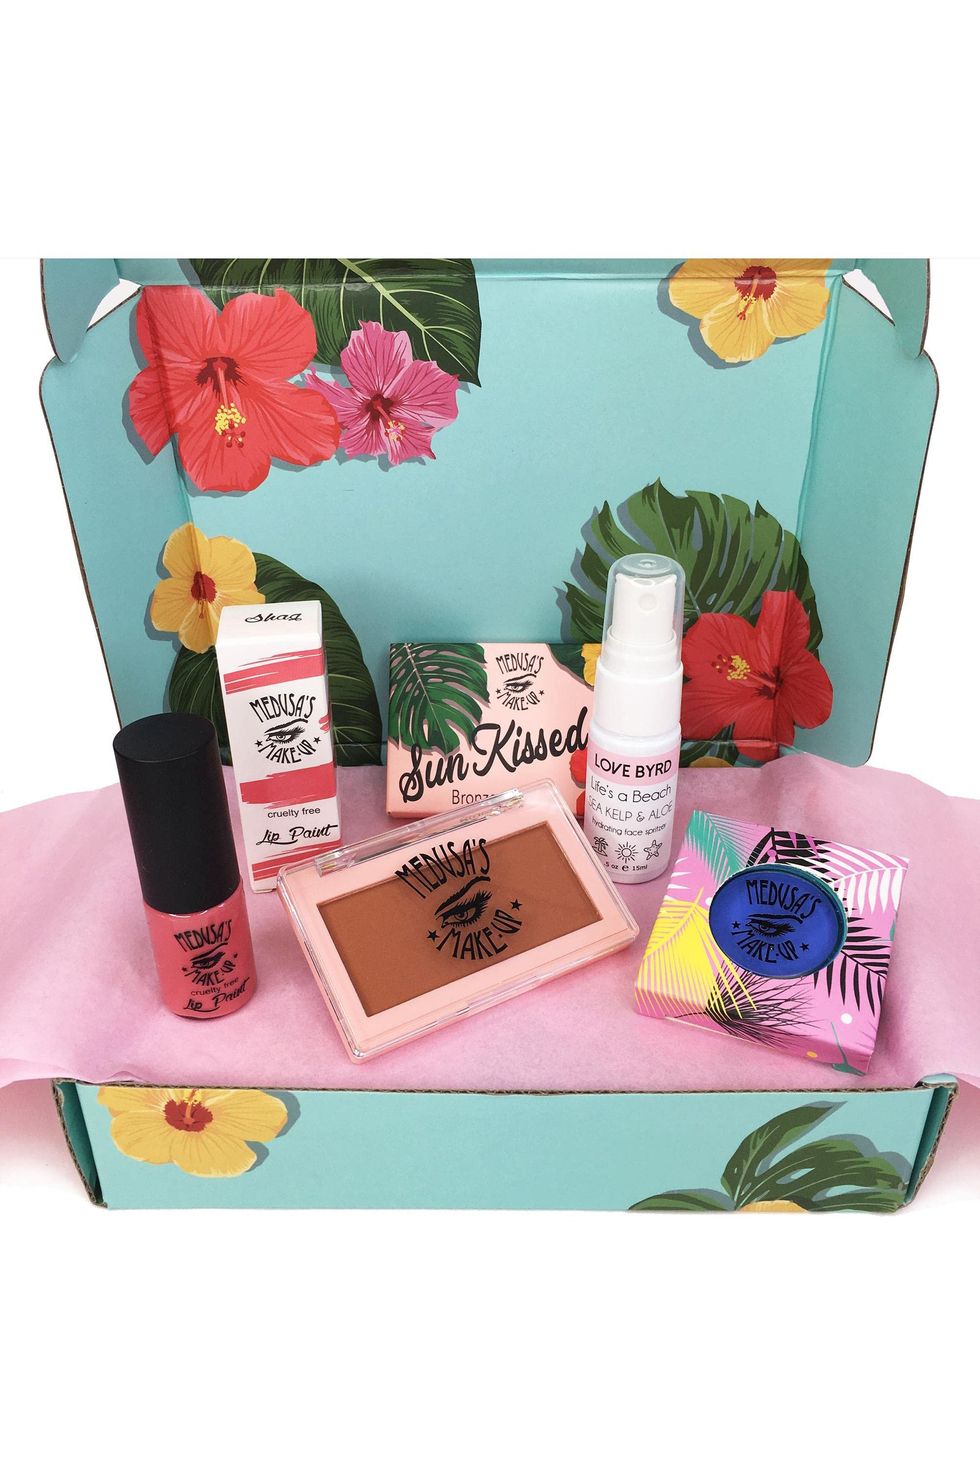 Best Makeup Subscription Boxes - Beauty Subscription Gifts